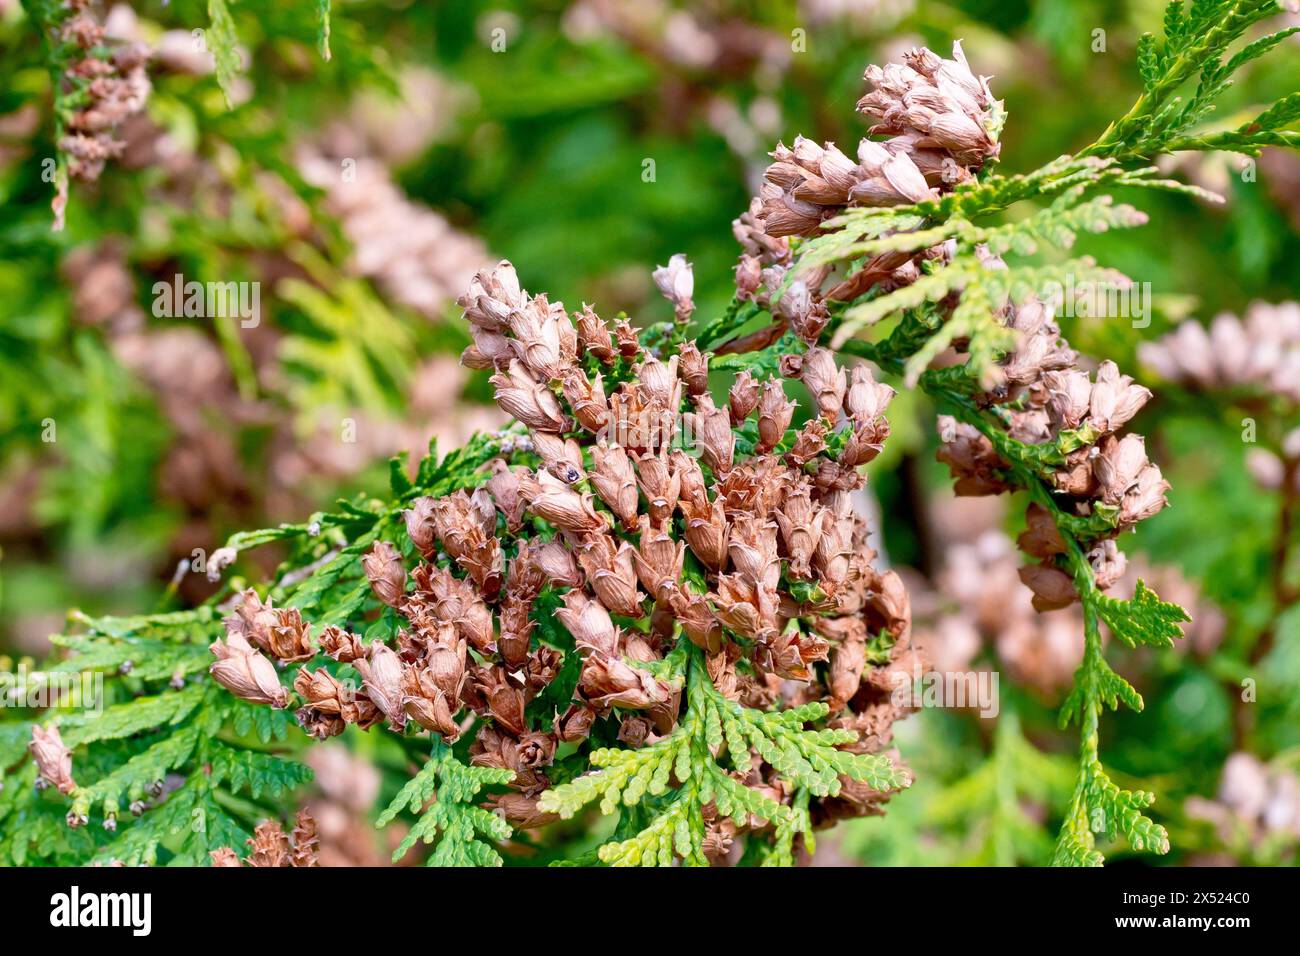 Cypress shrub, possibly Eastern White-cedar or Arborvitae (thuja occidentalis), close up showing the old dried up cones from the previous season. Stock Photo